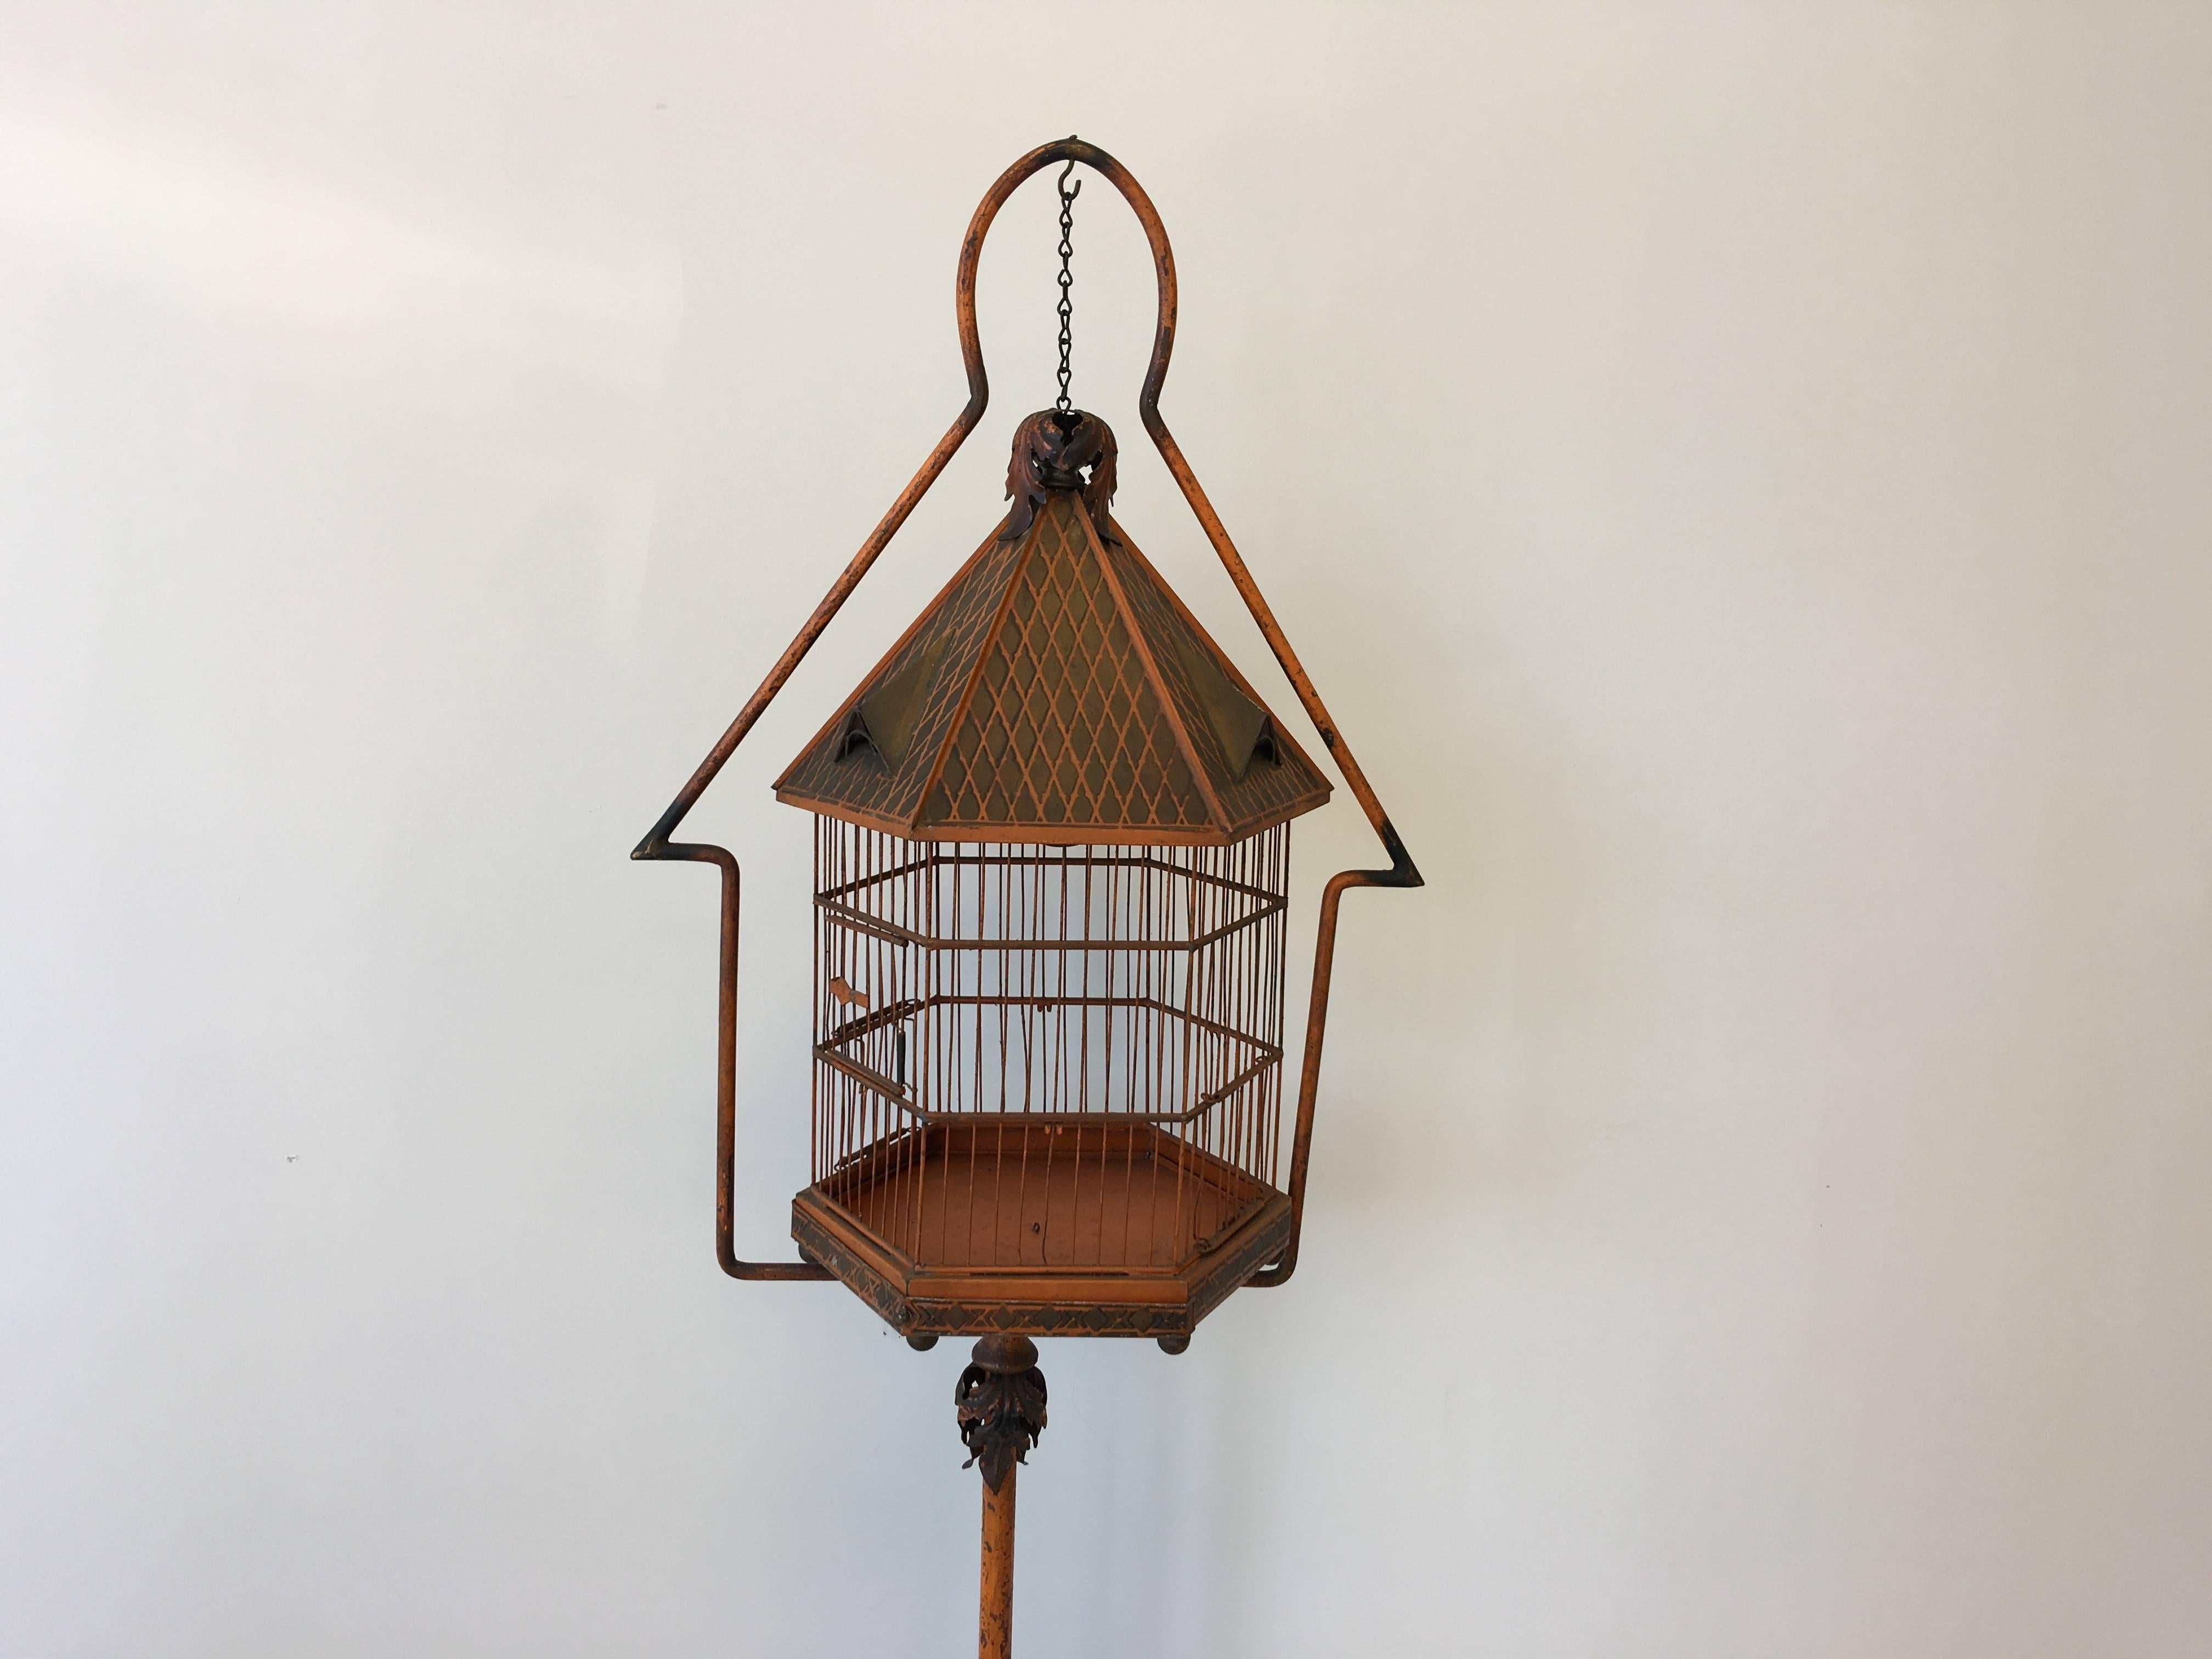 Offered is a beautiful, antique late 19th century tole painted birdcage and stand by P.N.F. Made in Czechoslovakia. Features shades of orange, green, and black. Three small windows along the roof, great fretwork along the base, and metal leaf